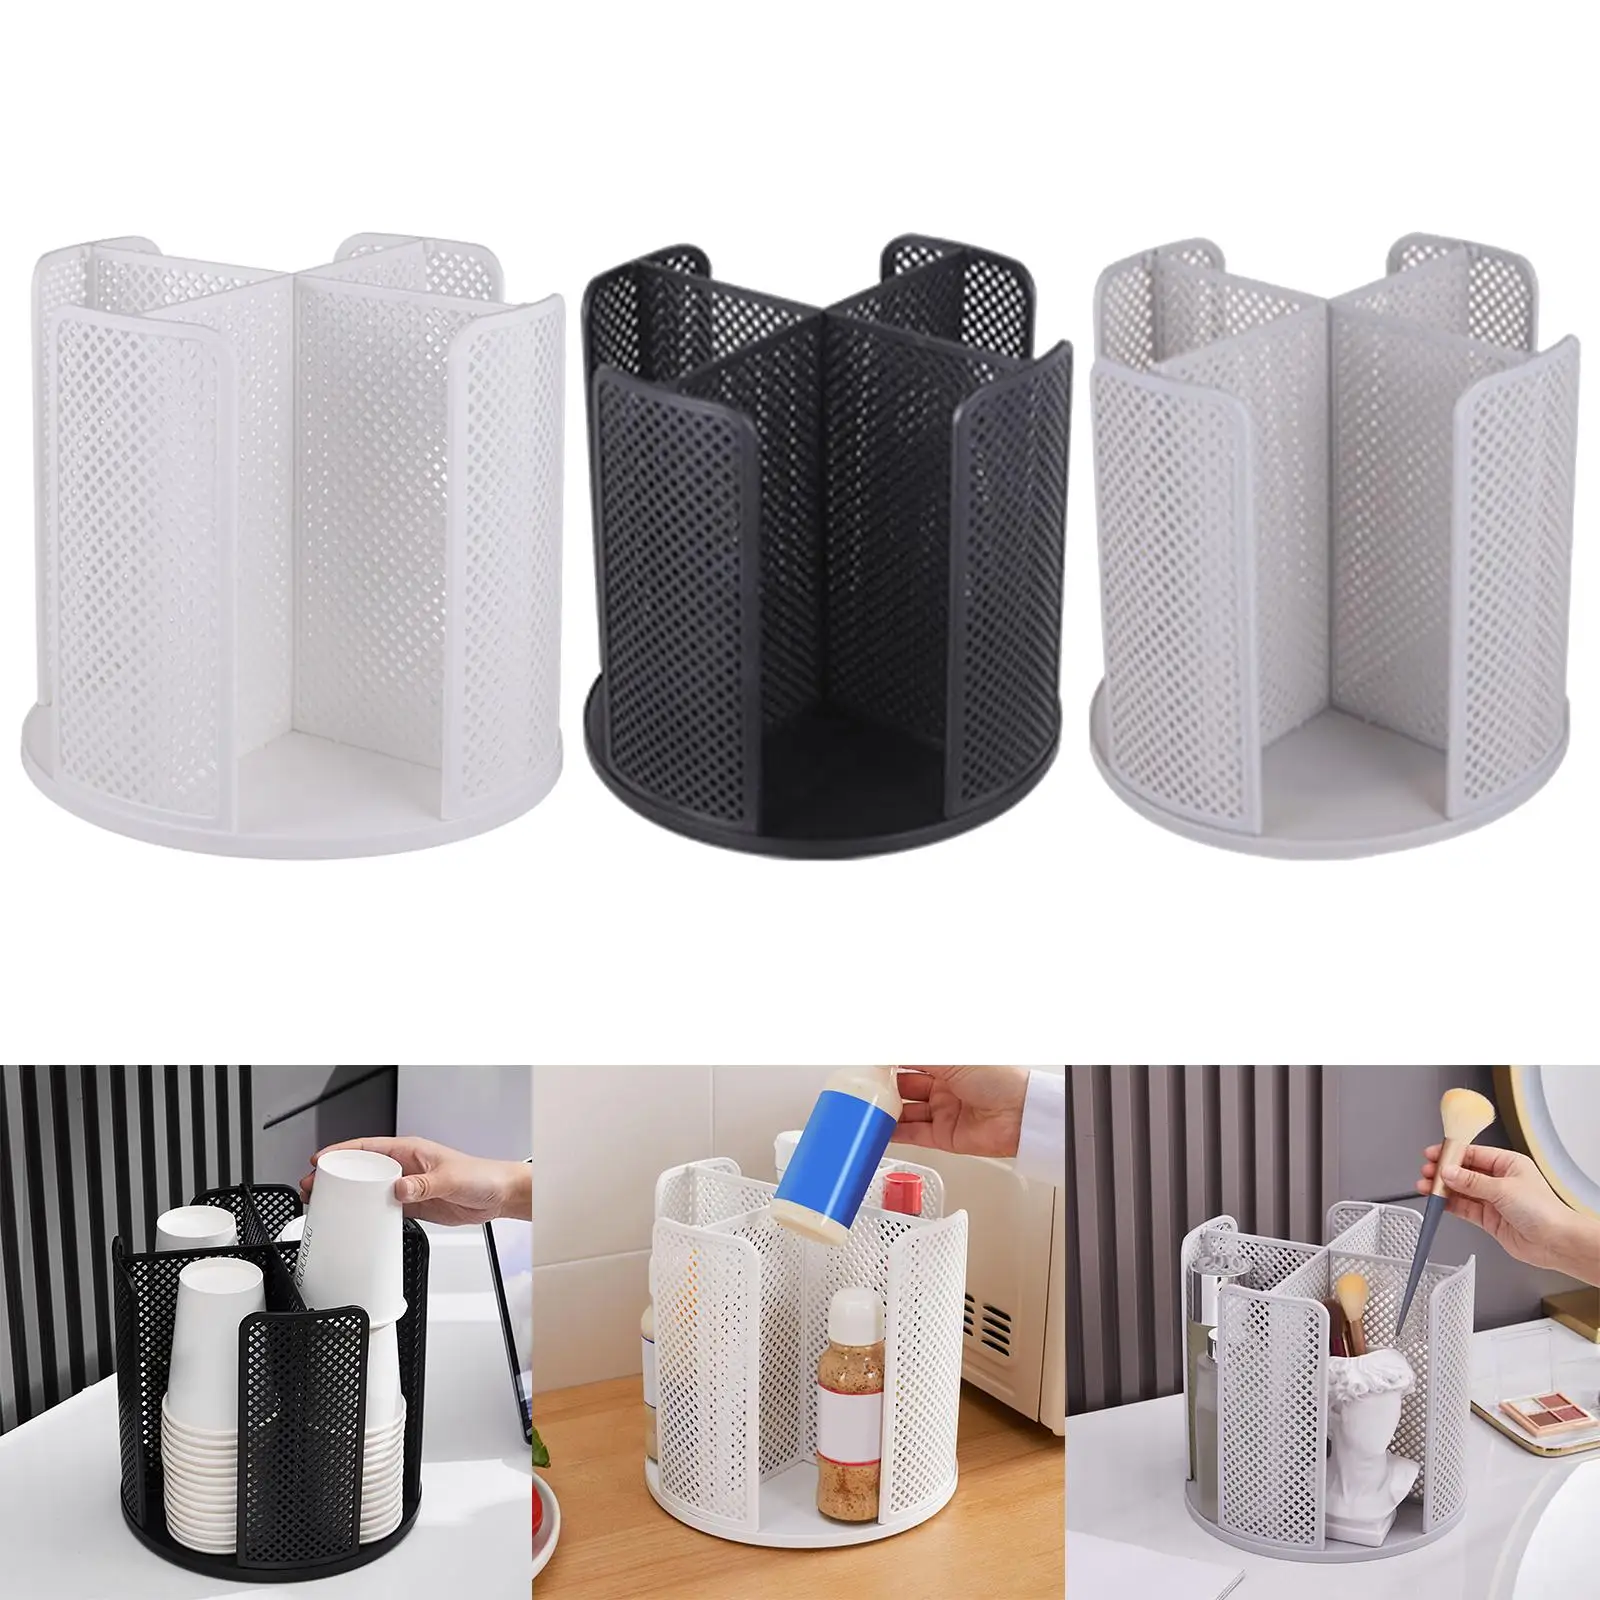 Turntable Disposable Cup and Lid Holder 4 Compartment for 